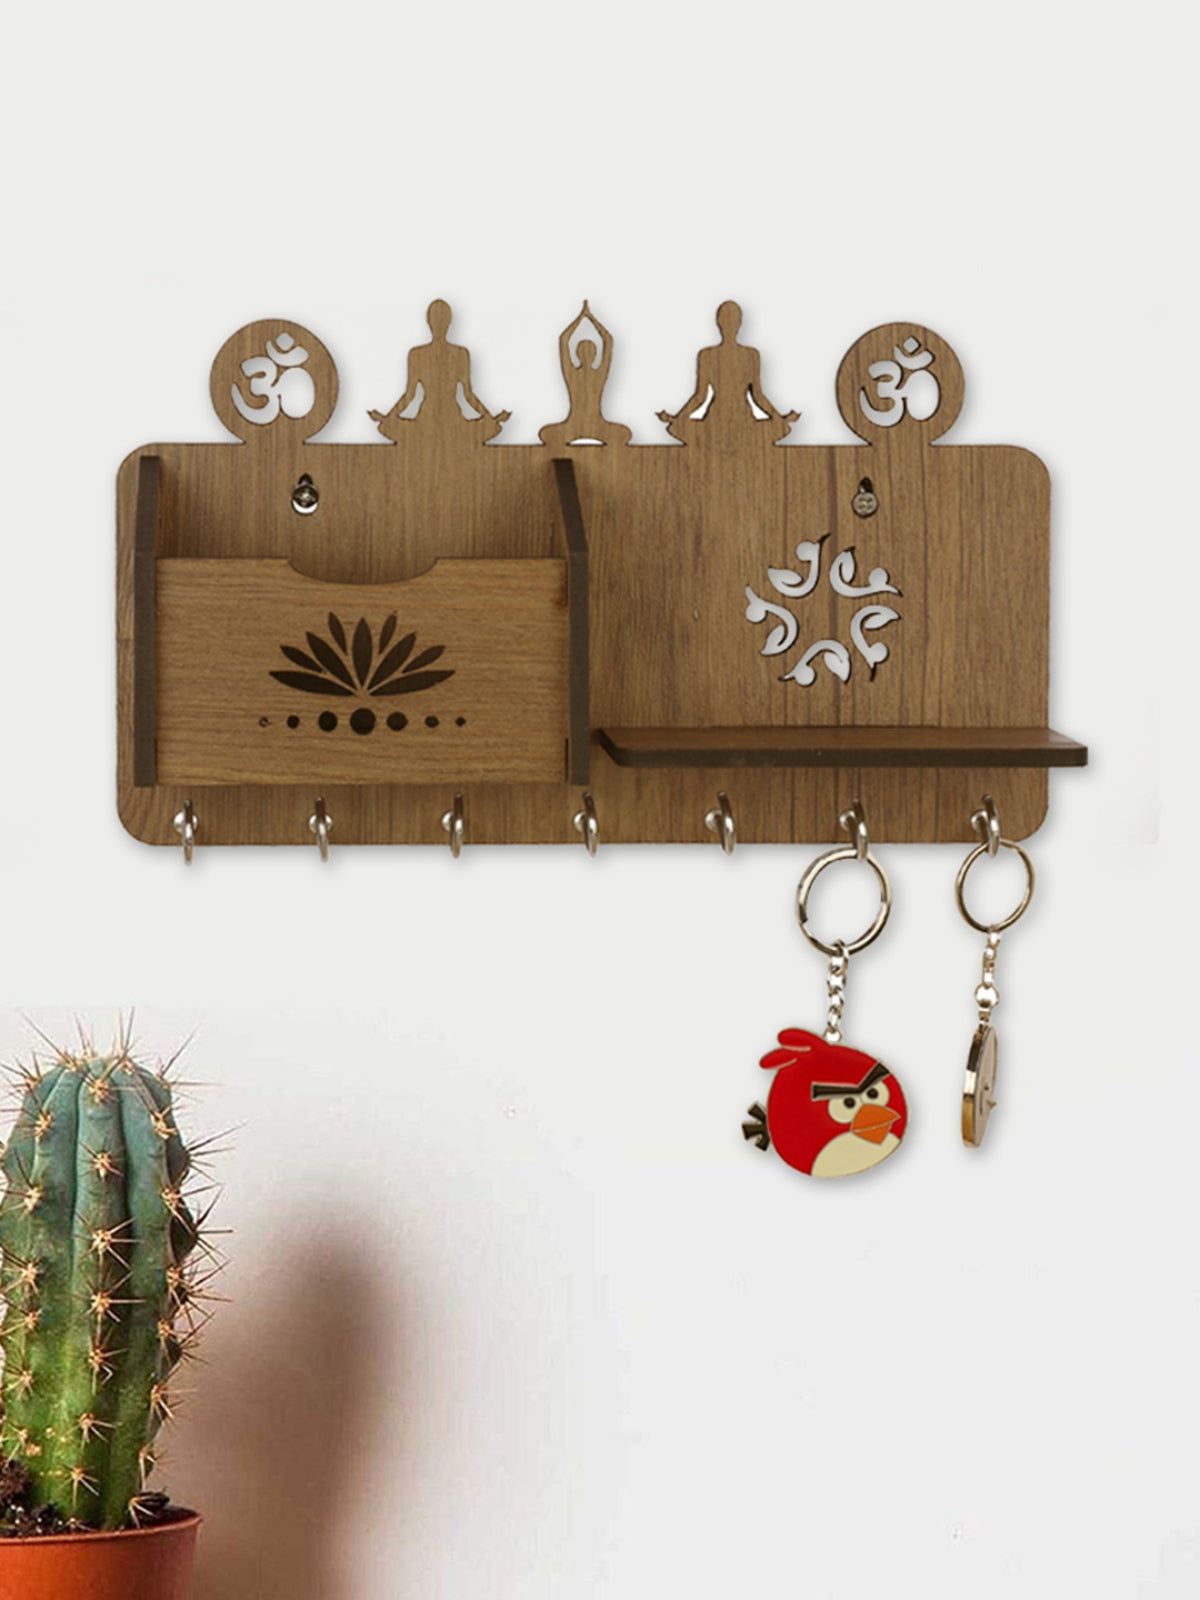 Wooden Key Holder With 1 Shelf & 1 Mobile Stand Holder For Home & Office Wall Decorative